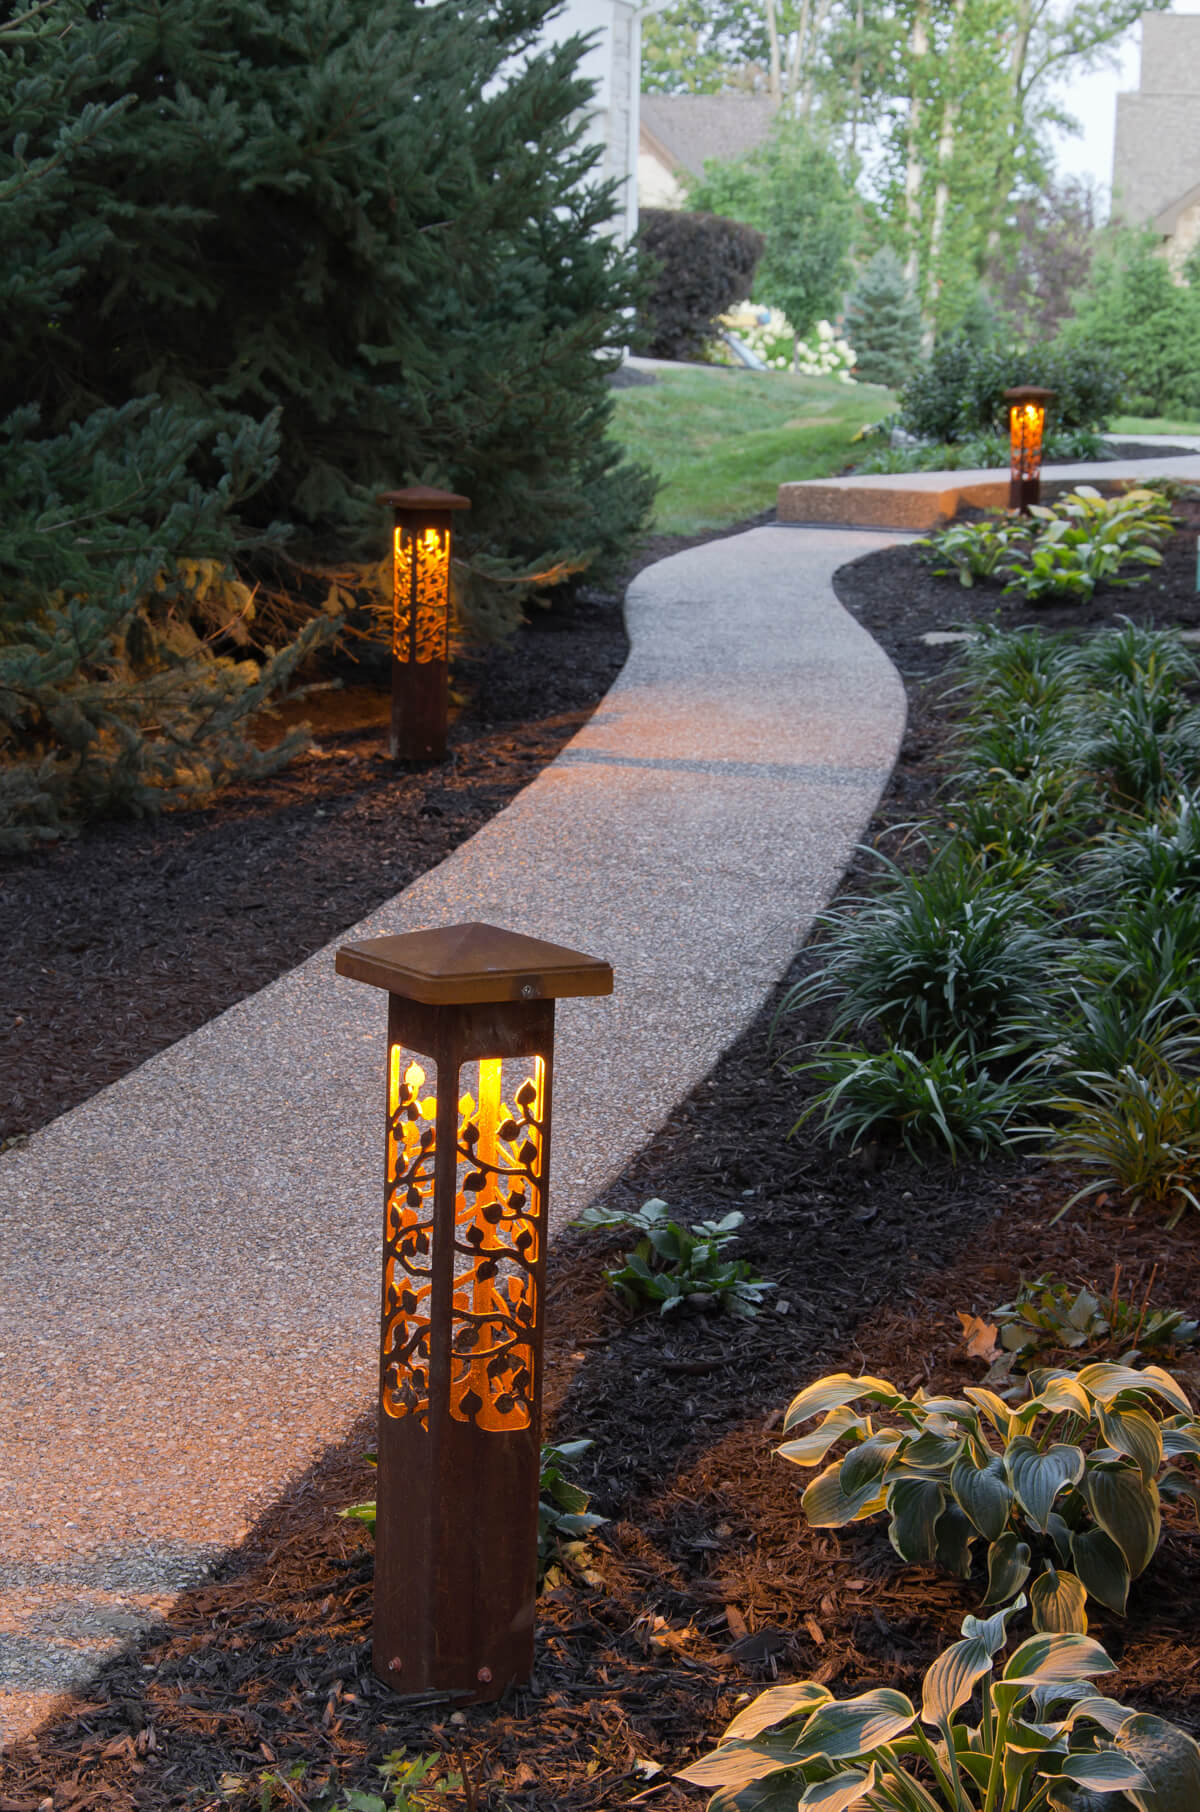 Specialty path lighting